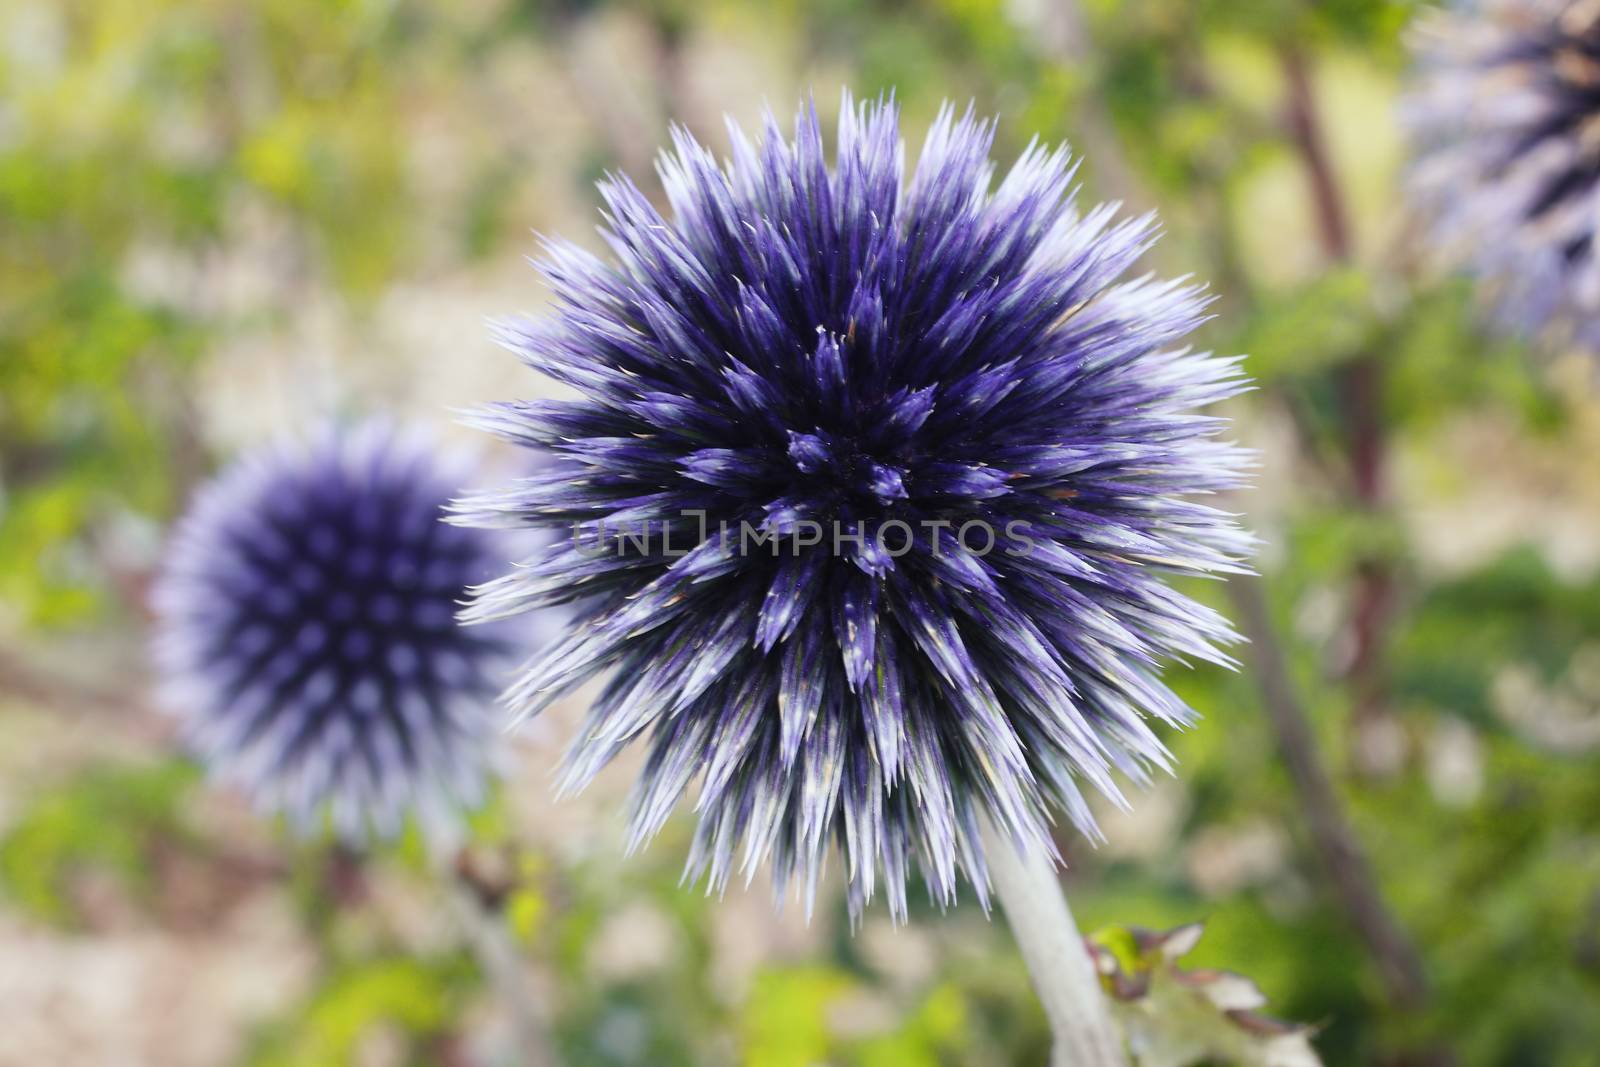 Echinops a common cultivated herbaceous perennial hardy blue gar by ant